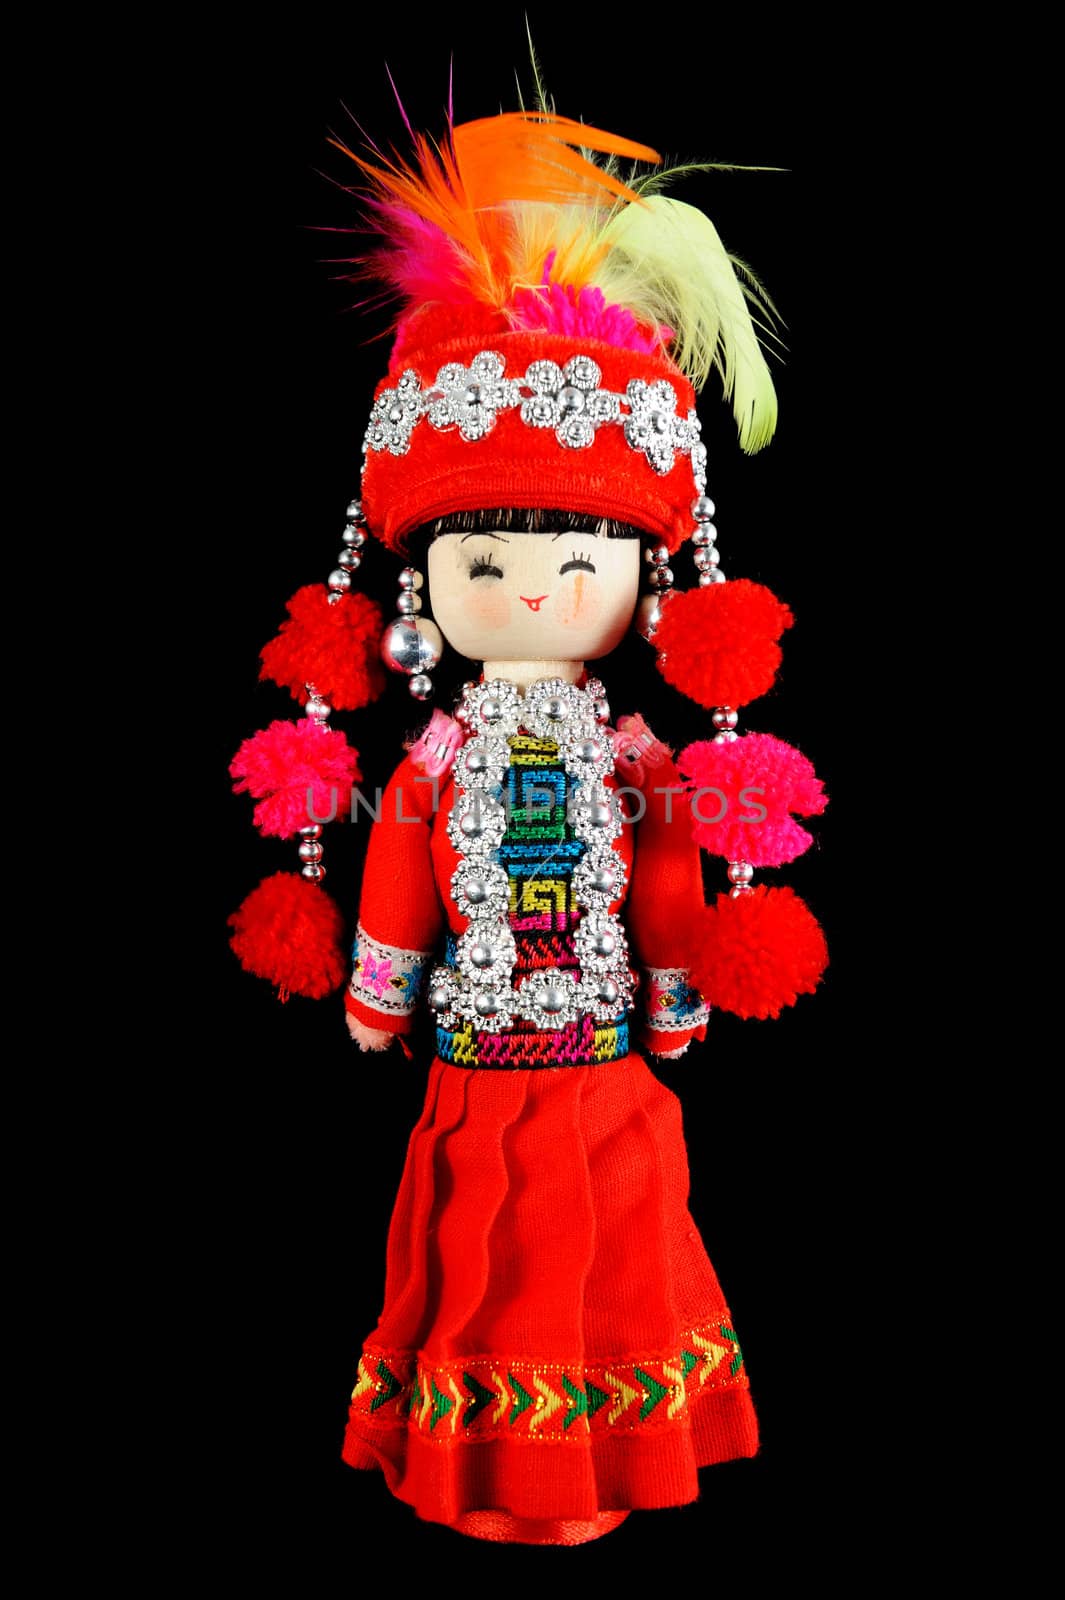 Chinese doll by raywoo